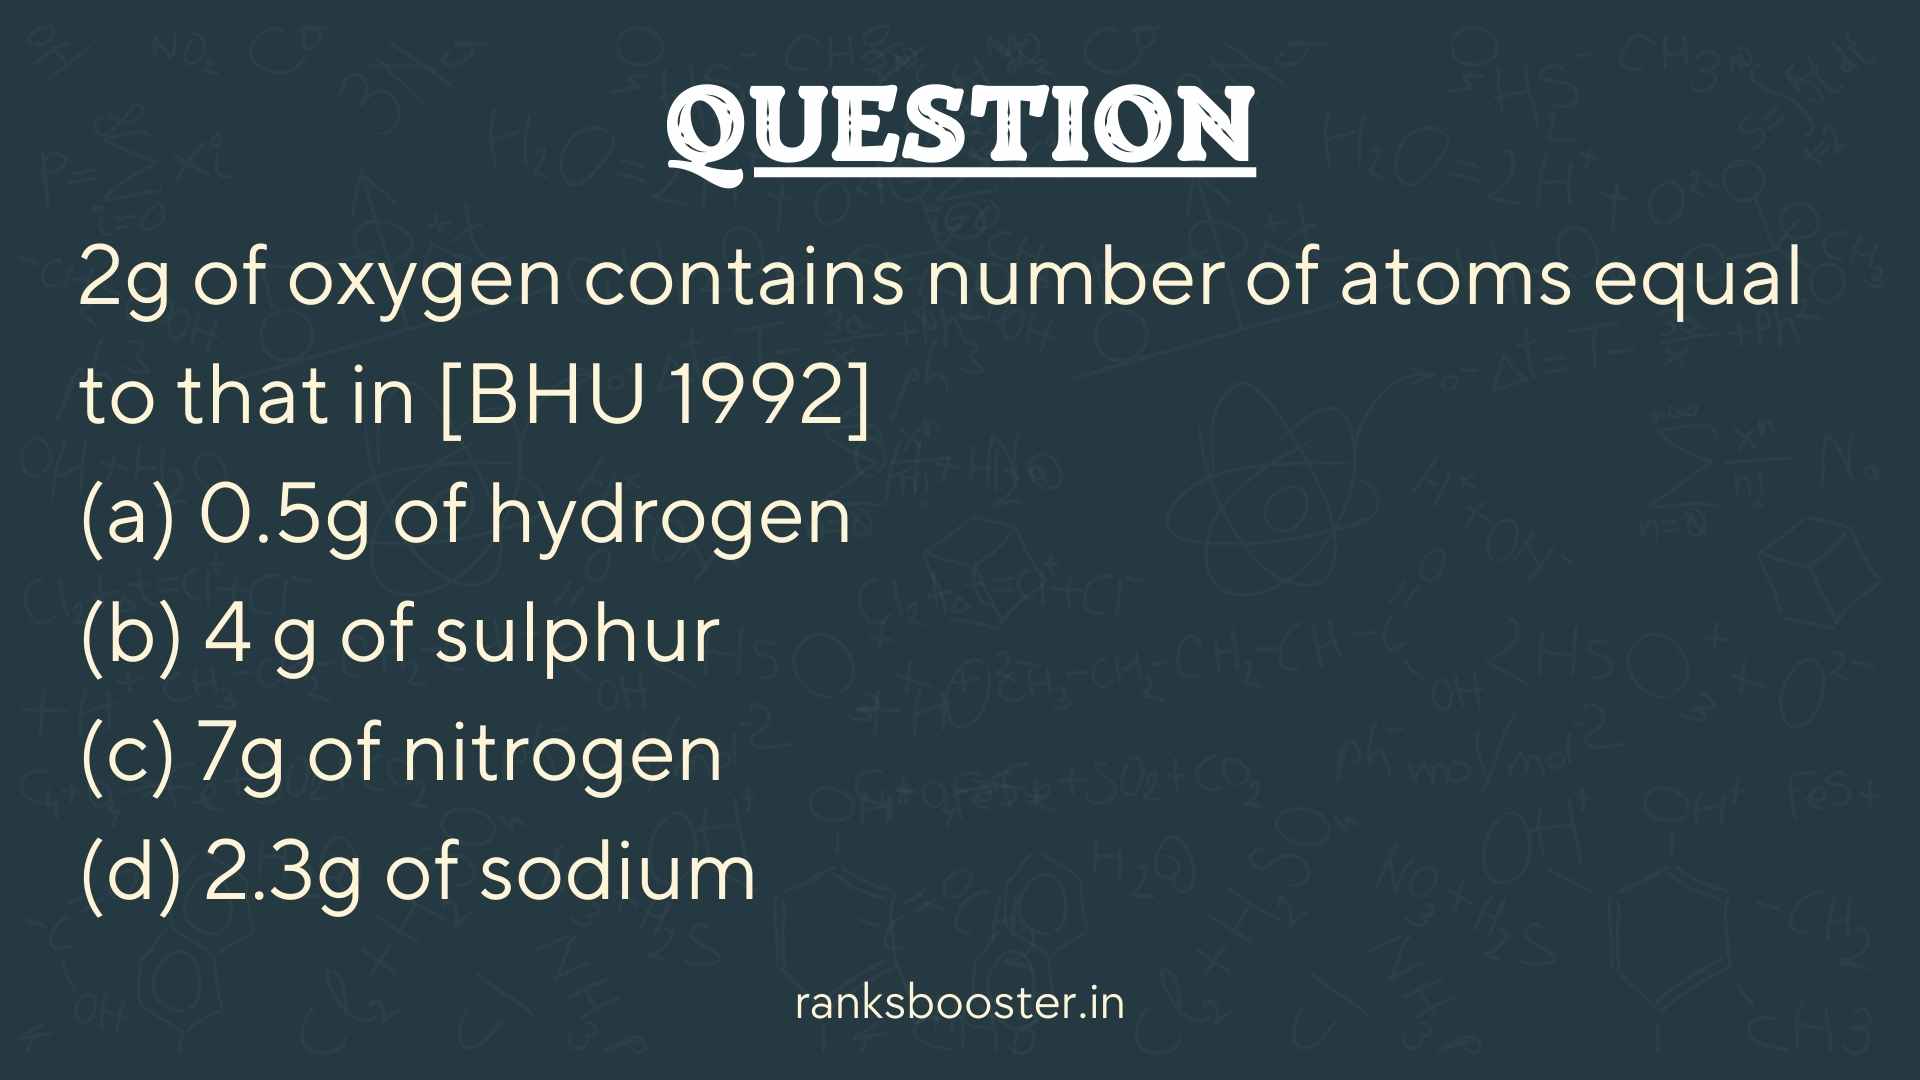 2g of oxygen contains number of atoms equal to that in [BHU 1992] (a) 0.5g of hydrogen (b) 4 g of sulphur (c) 7g of nitrogen (d) 2.3g of sodium